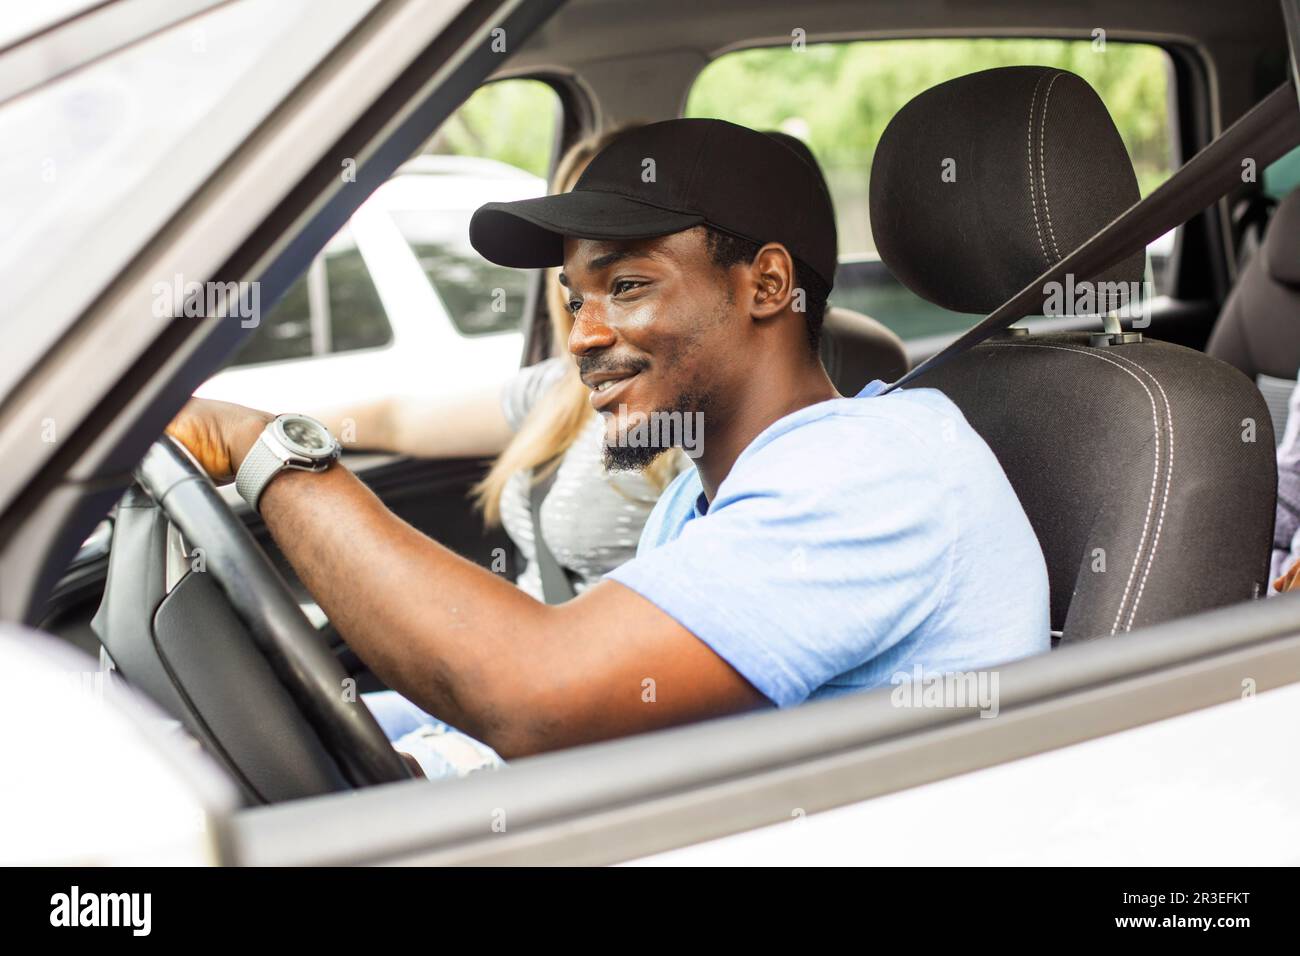 Cheerful young man driving car with friends on vacation Stock Photo